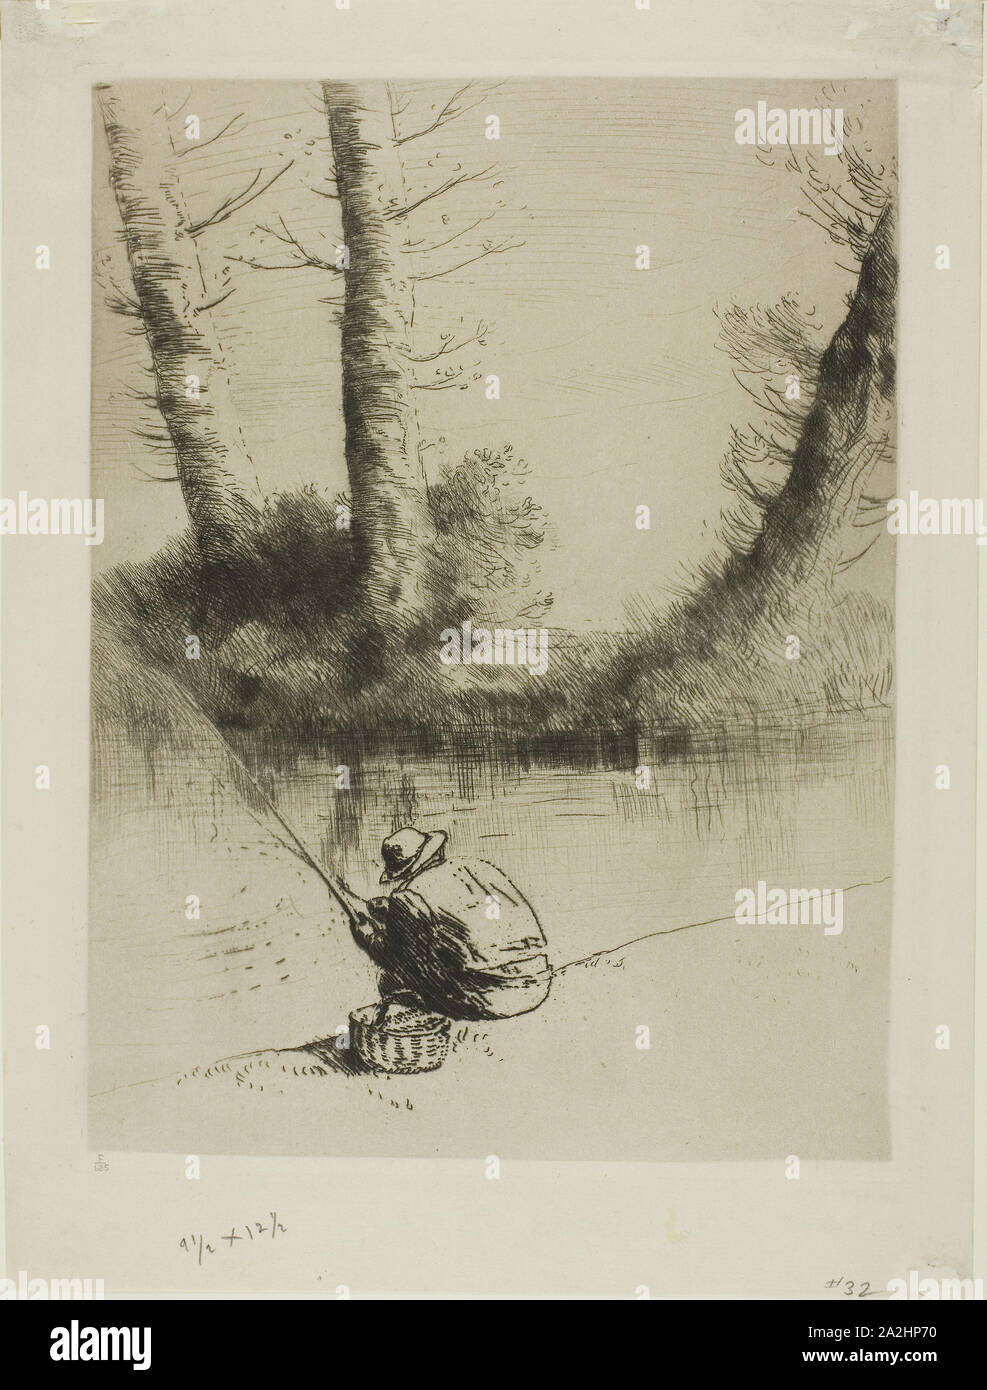 Pole Fisherman, 1878, Alphonse Legros, French, 1837-1911, France, Etching, drypoint and plate tone on light gray laid paper, 293 × 219 mm (image), 356 × 263 mm (sheet Stock Photo